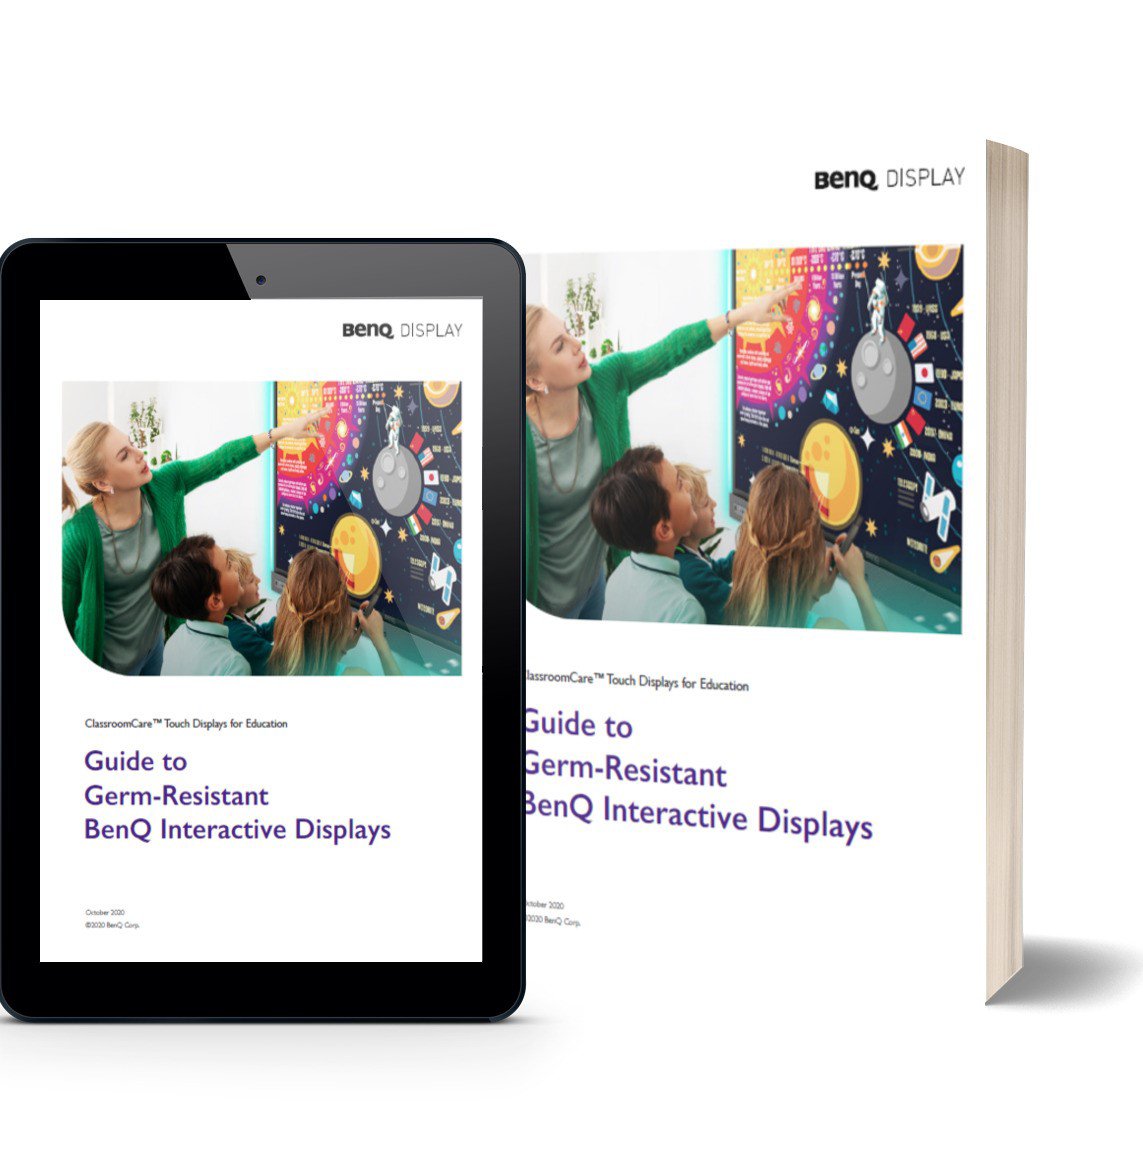 download BenQ guide to germ-resistant interactive displays in the classrooms